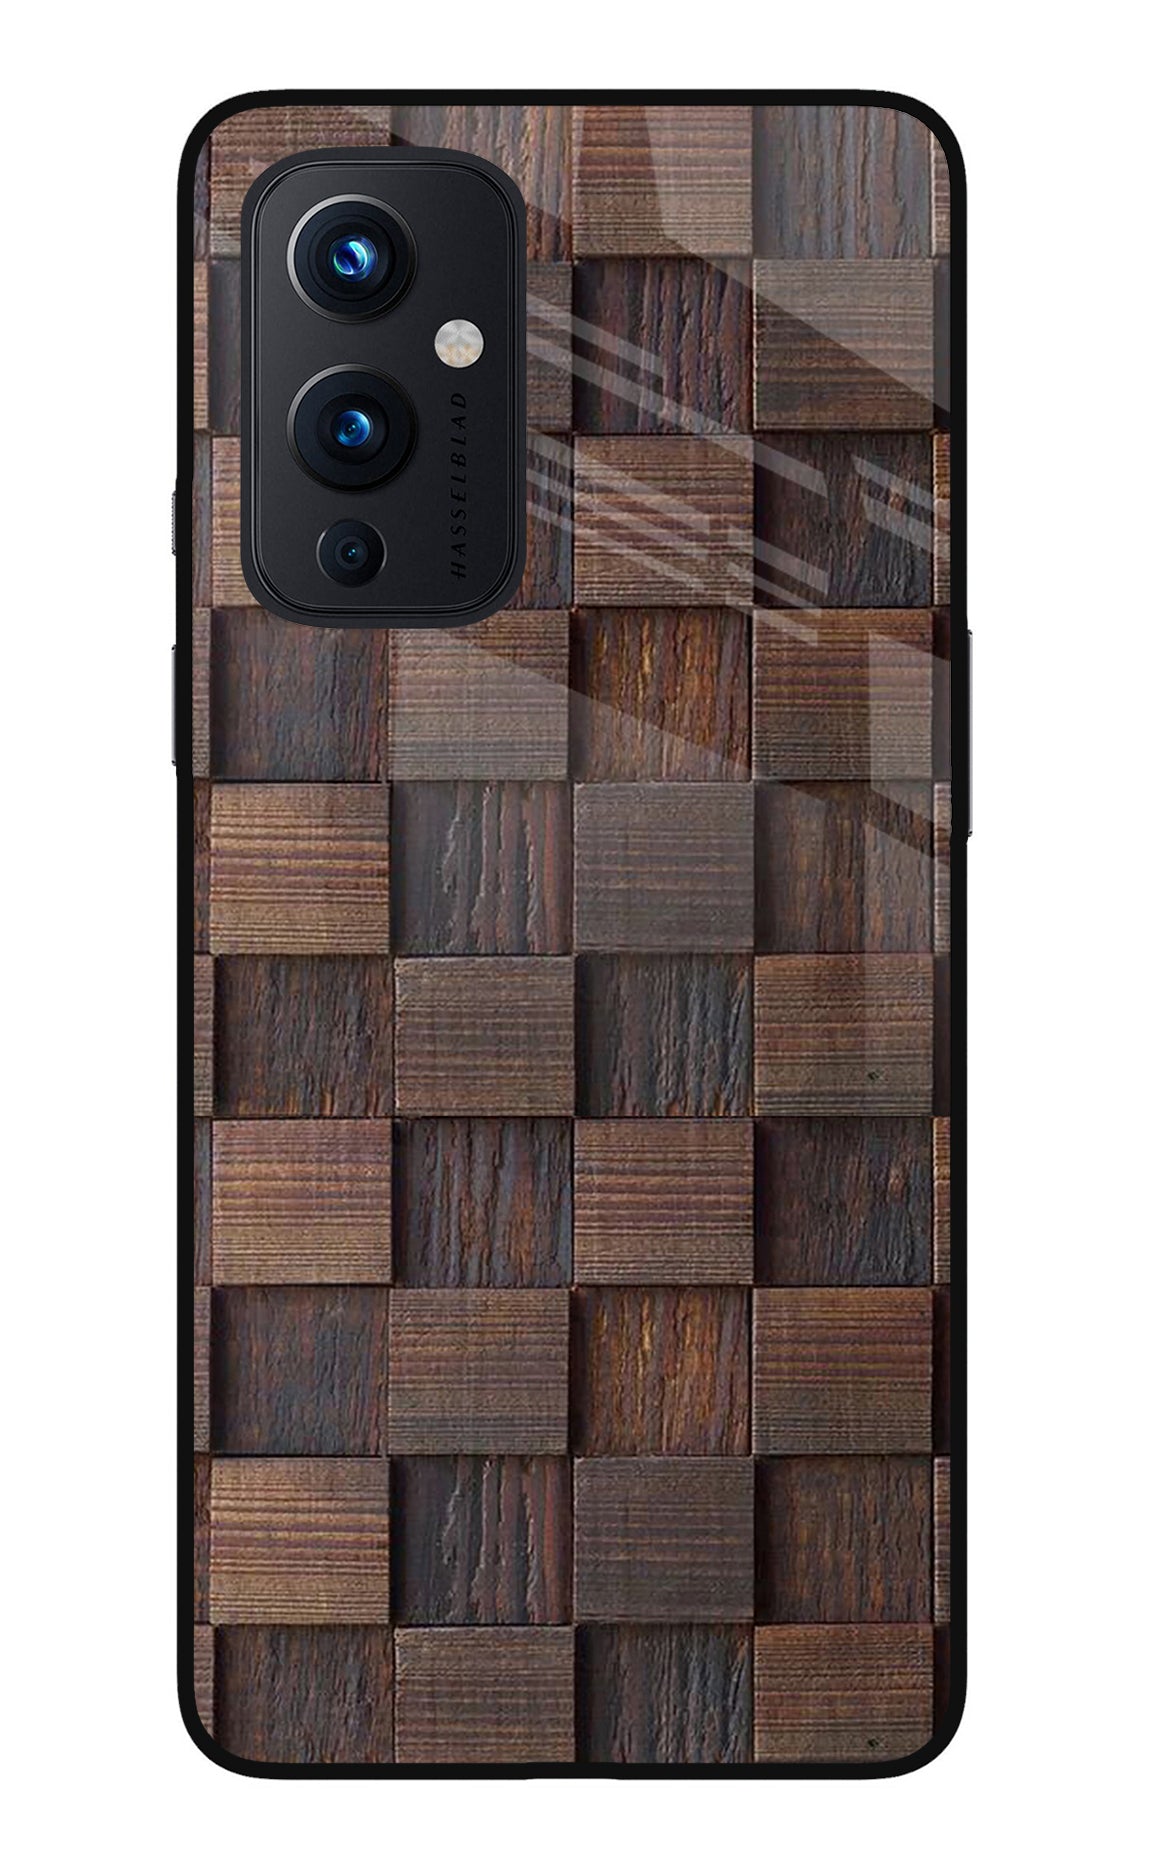 Wooden Cube Design Oneplus 9 Back Cover